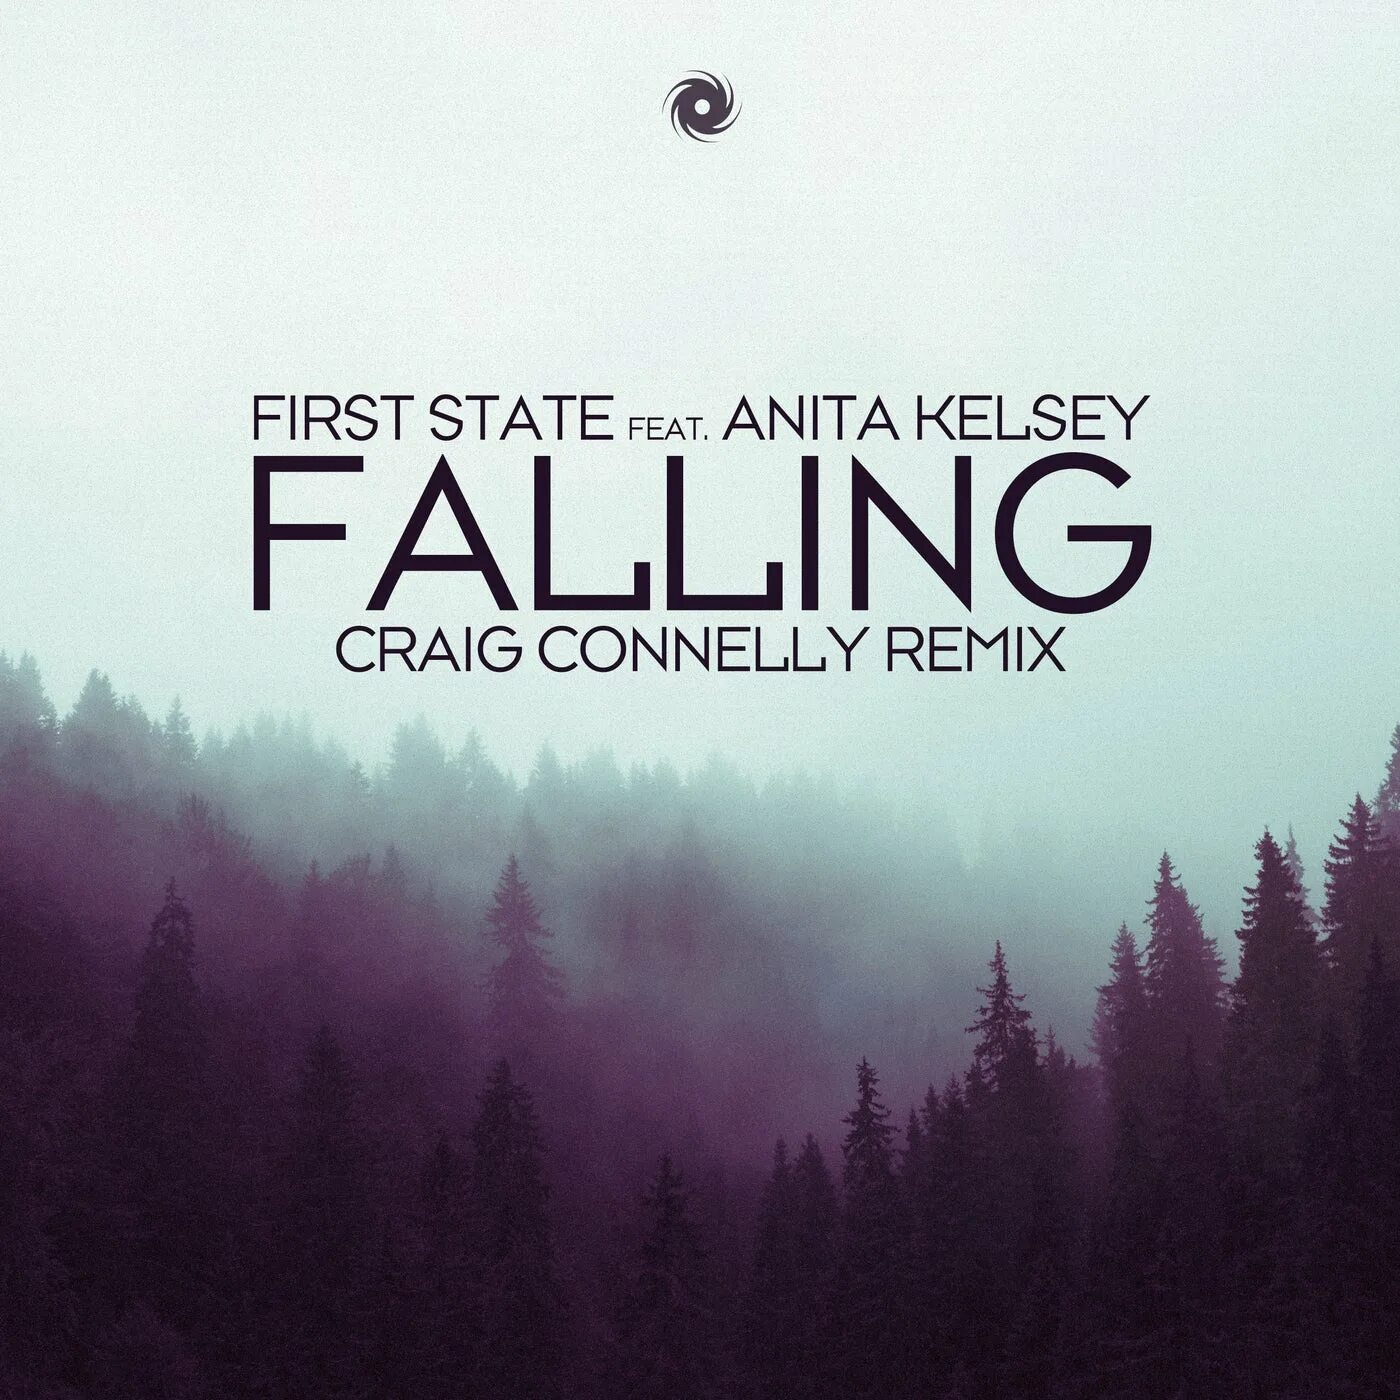 Craig Connelly. First State, Anita Kelsey Falling - Craig Connelly Remix. Anita Kelsey. Jes - Love my way (Craig Connelly Remix). Falling state